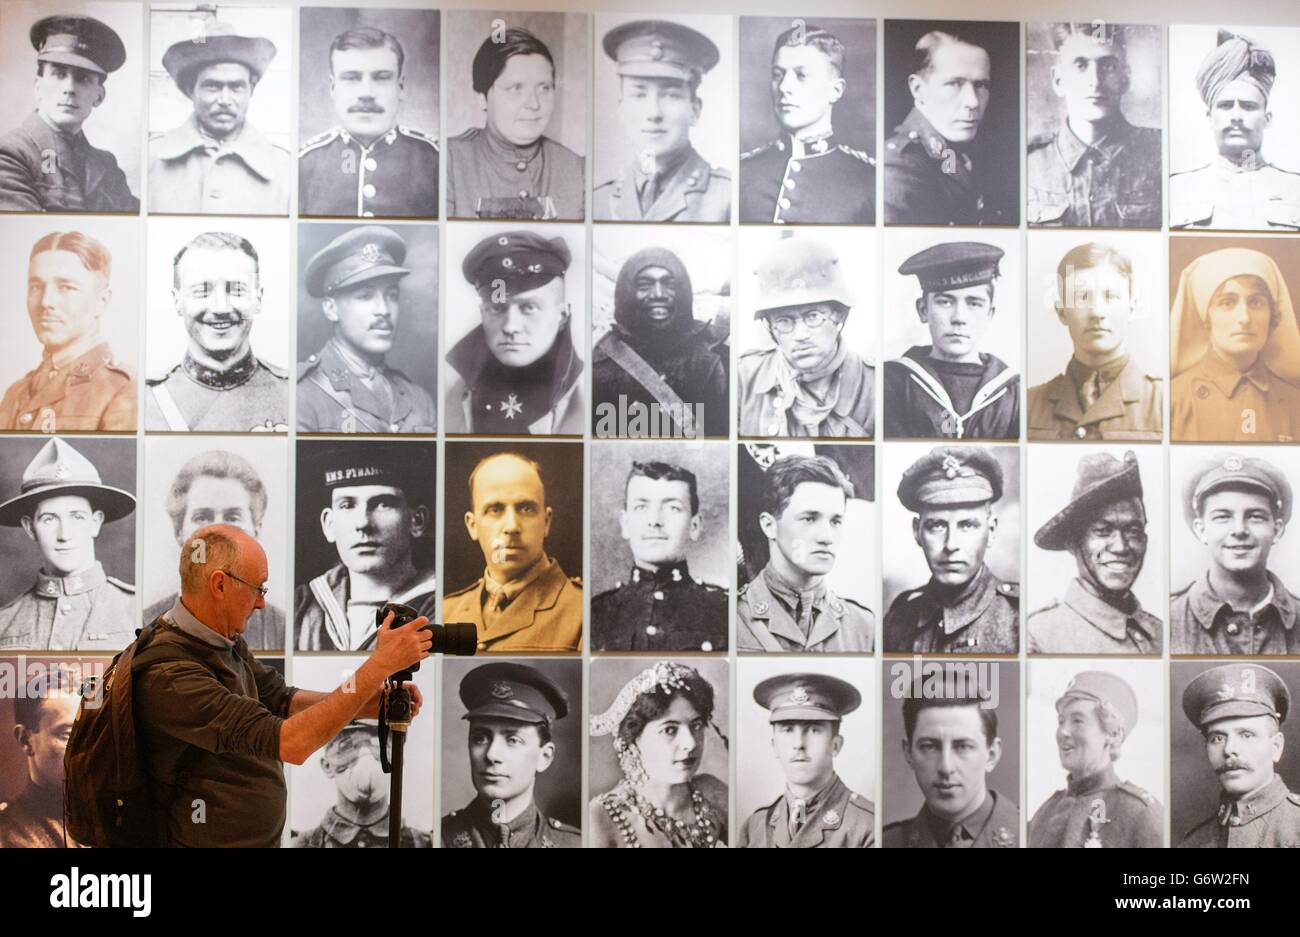 A visitor views a montage of portraits of protagonists of World War I, which is part of 'The Great War in Portraits' exhibition, which runs at the National Portrait Gallery, in central London, from February 27 to June 15, 2014. Stock Photo